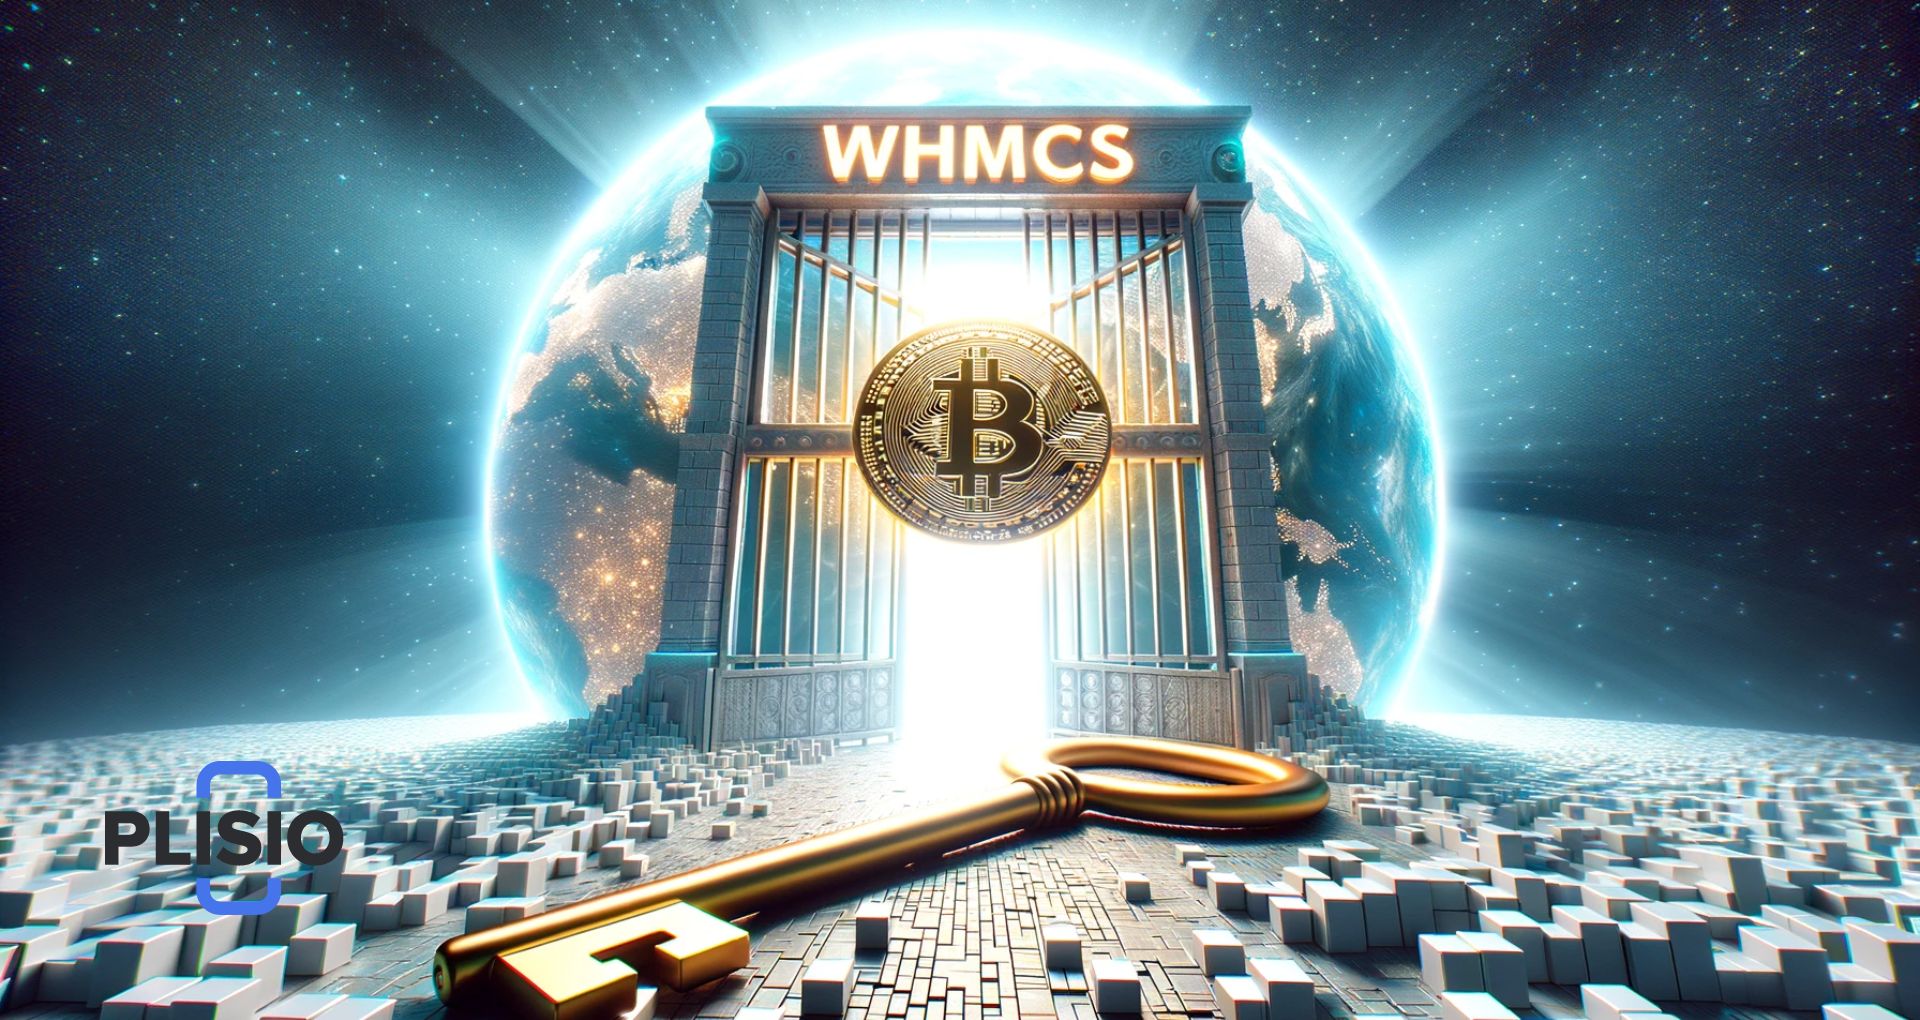 How to Accept Crypto Payments on WHMCS